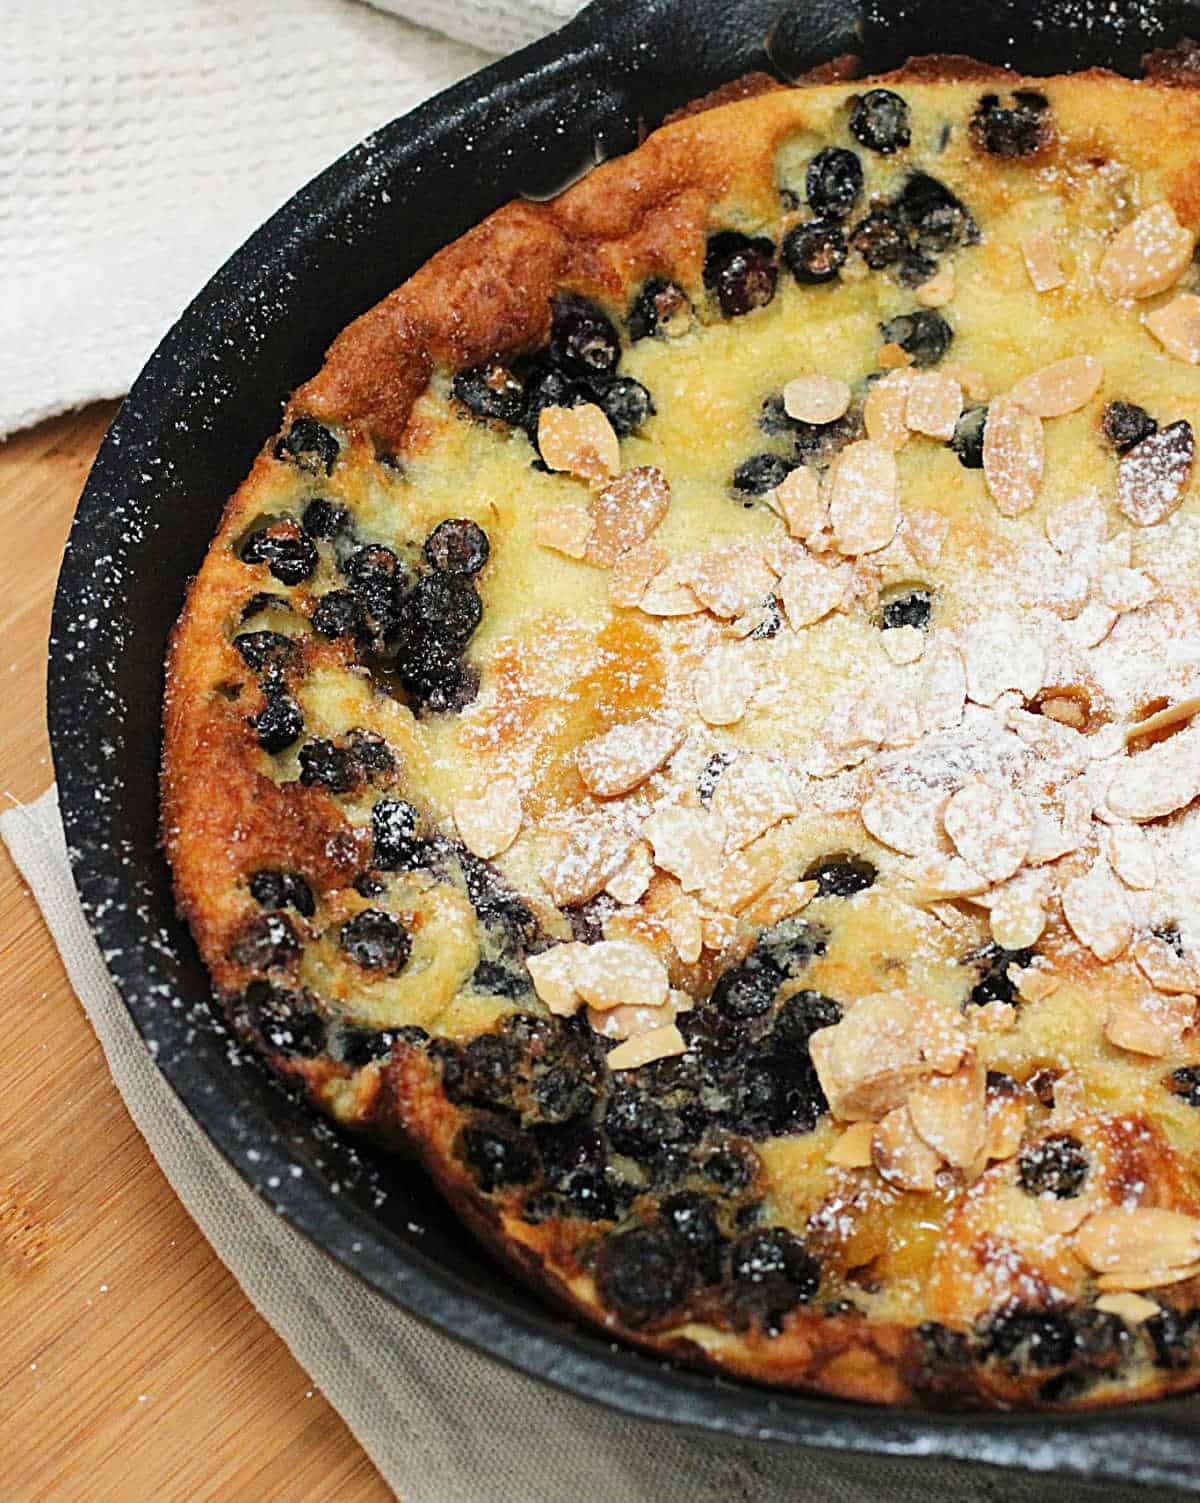 Cast iron skillet with baked blueberry pancake, almonds on top and powdered sugar. 